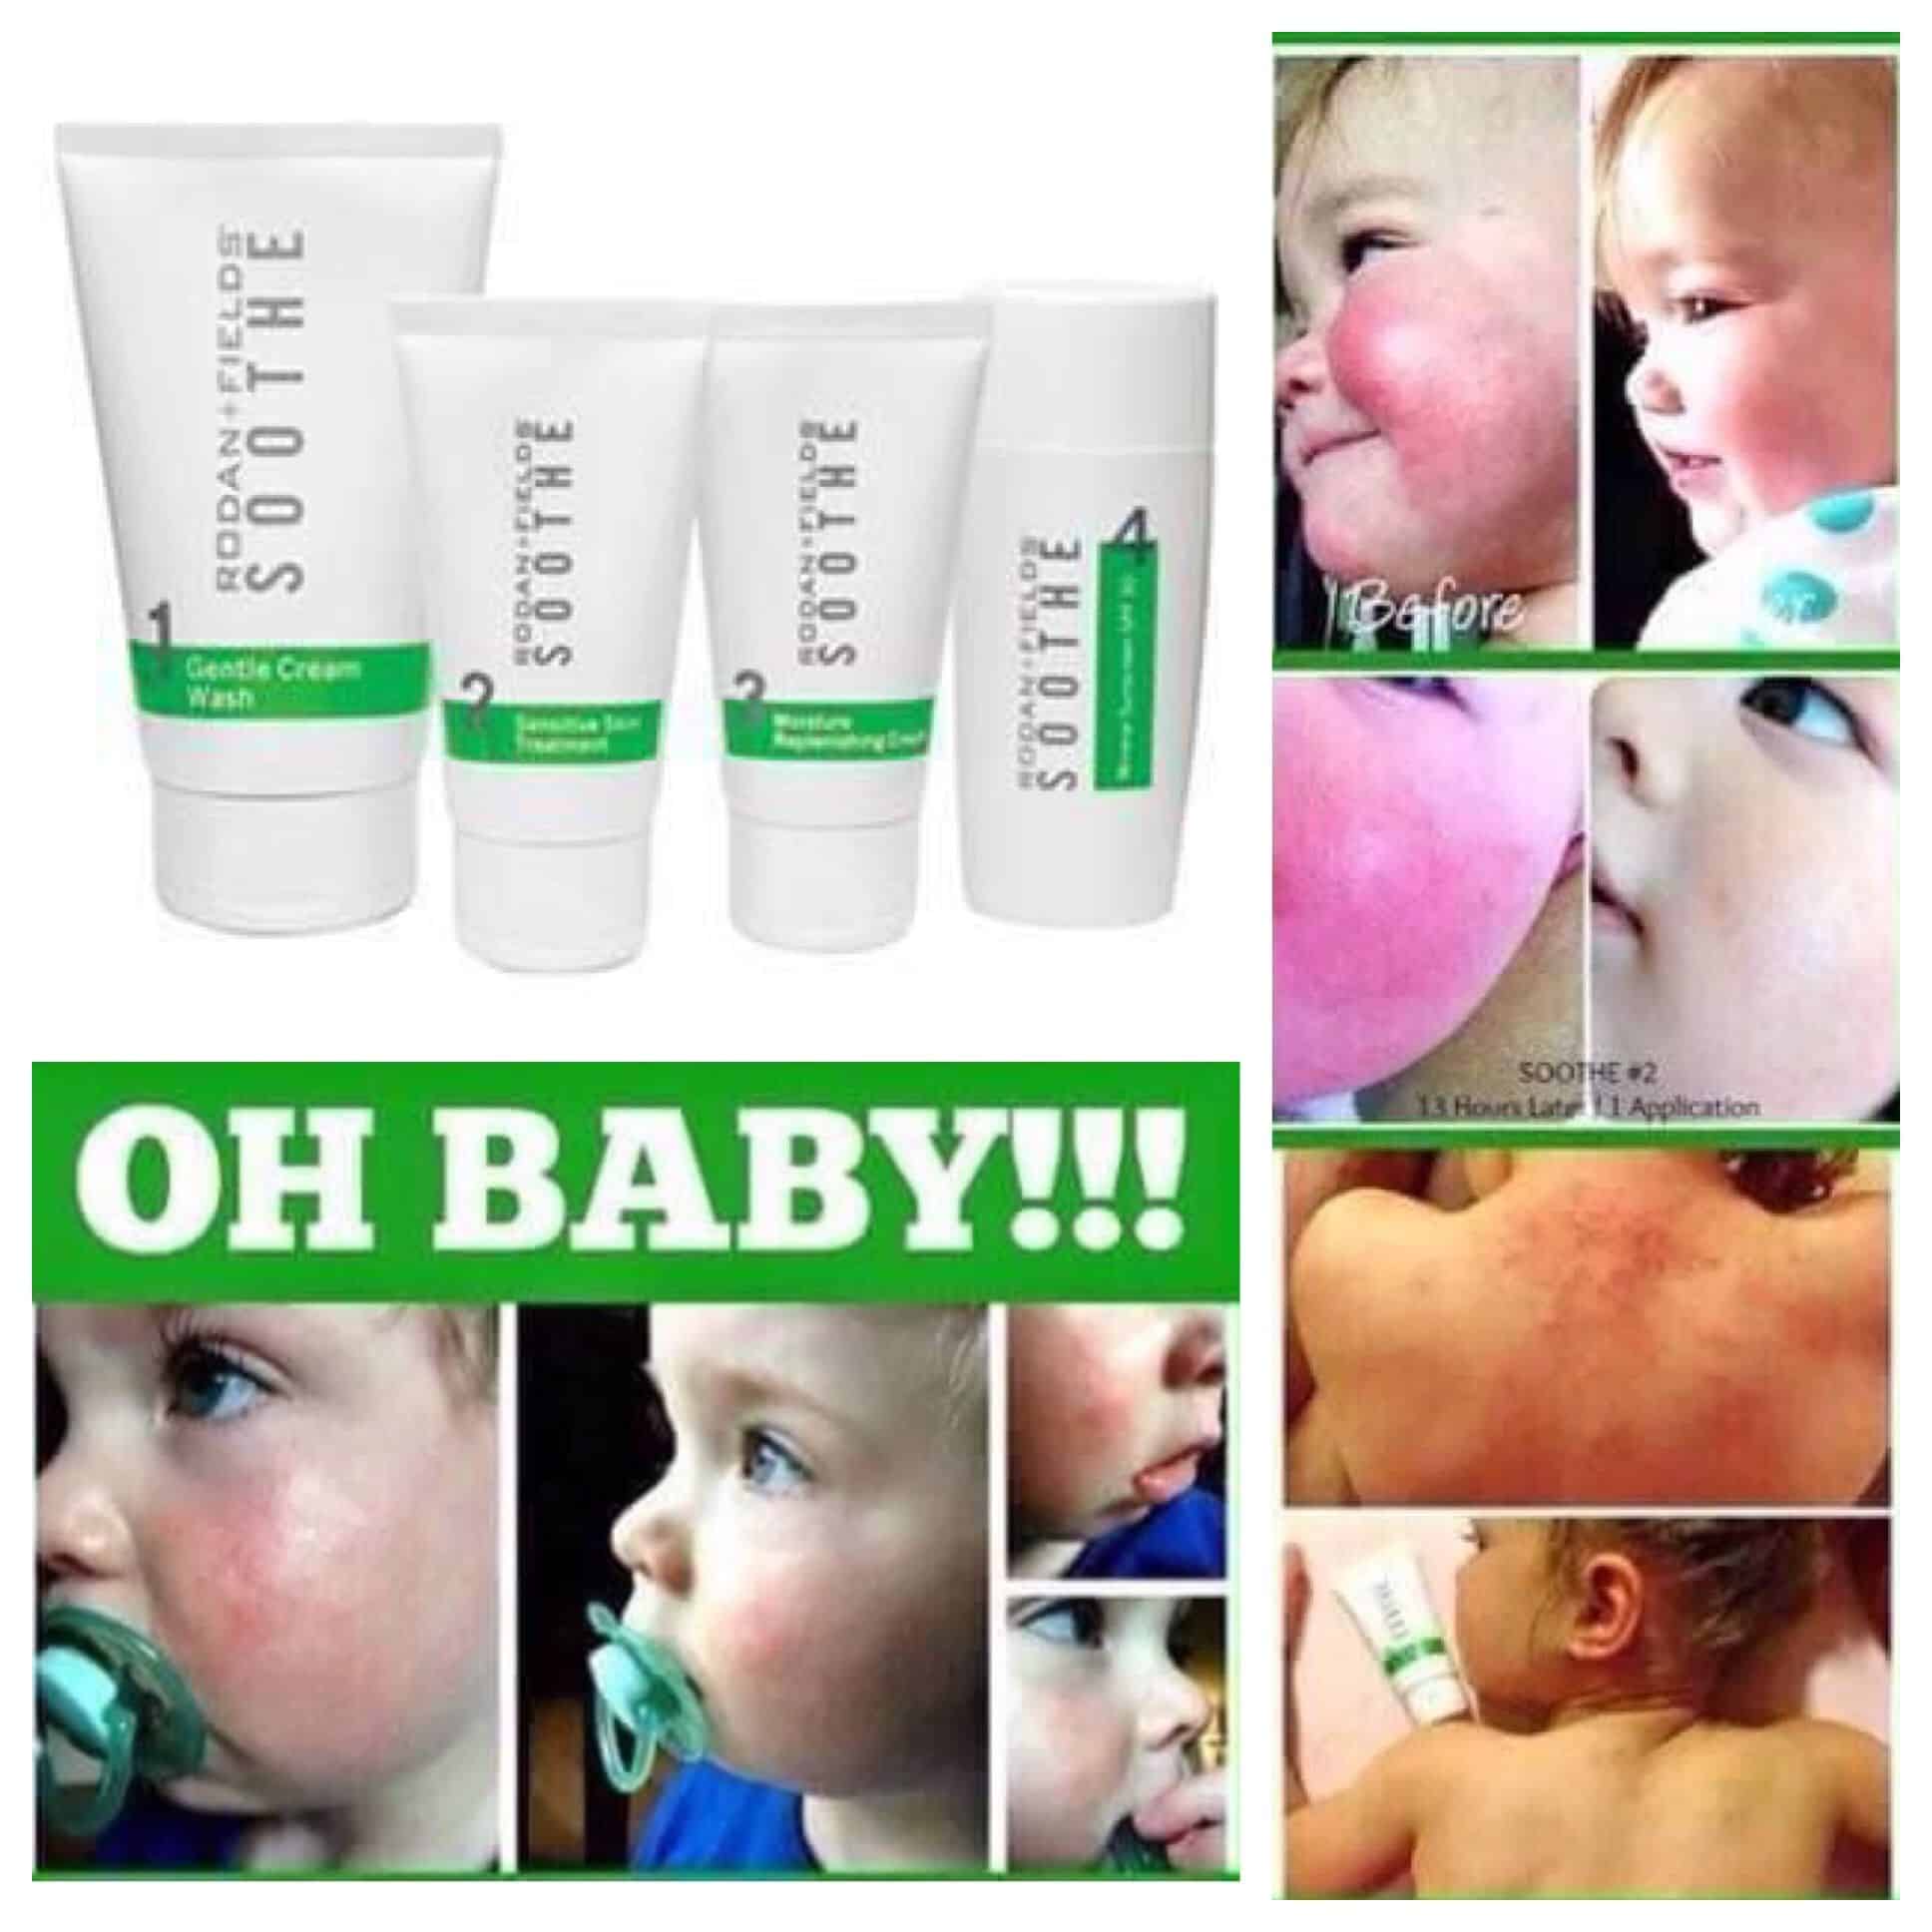 ðSoothe your baby with these products and give your little one some ...